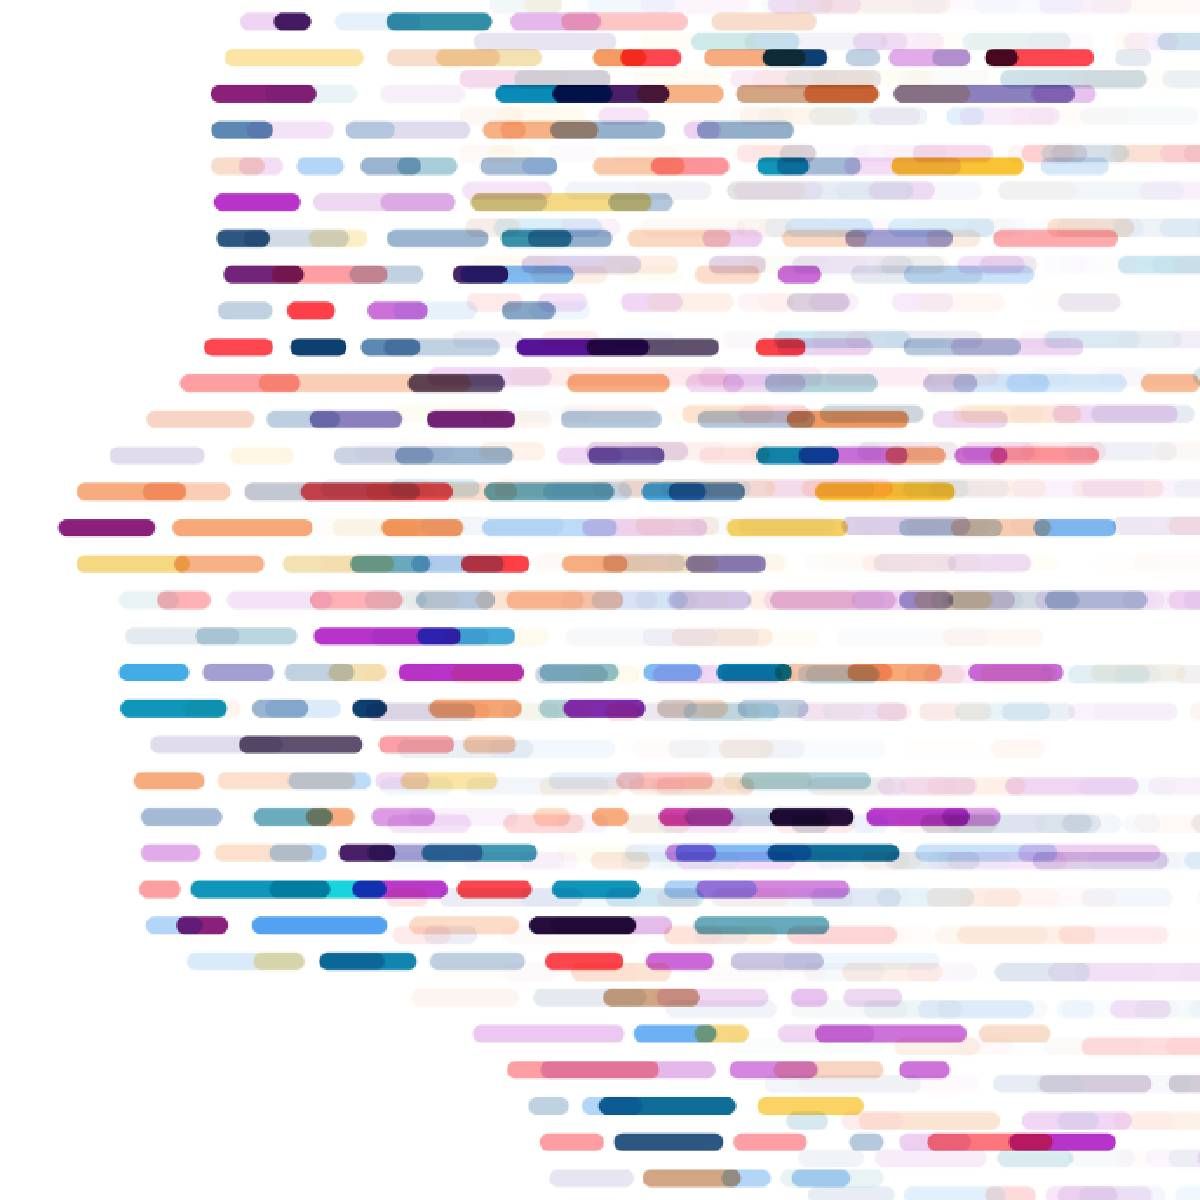 Genome sequence map in 23andMe colors making up a human face from a side profile